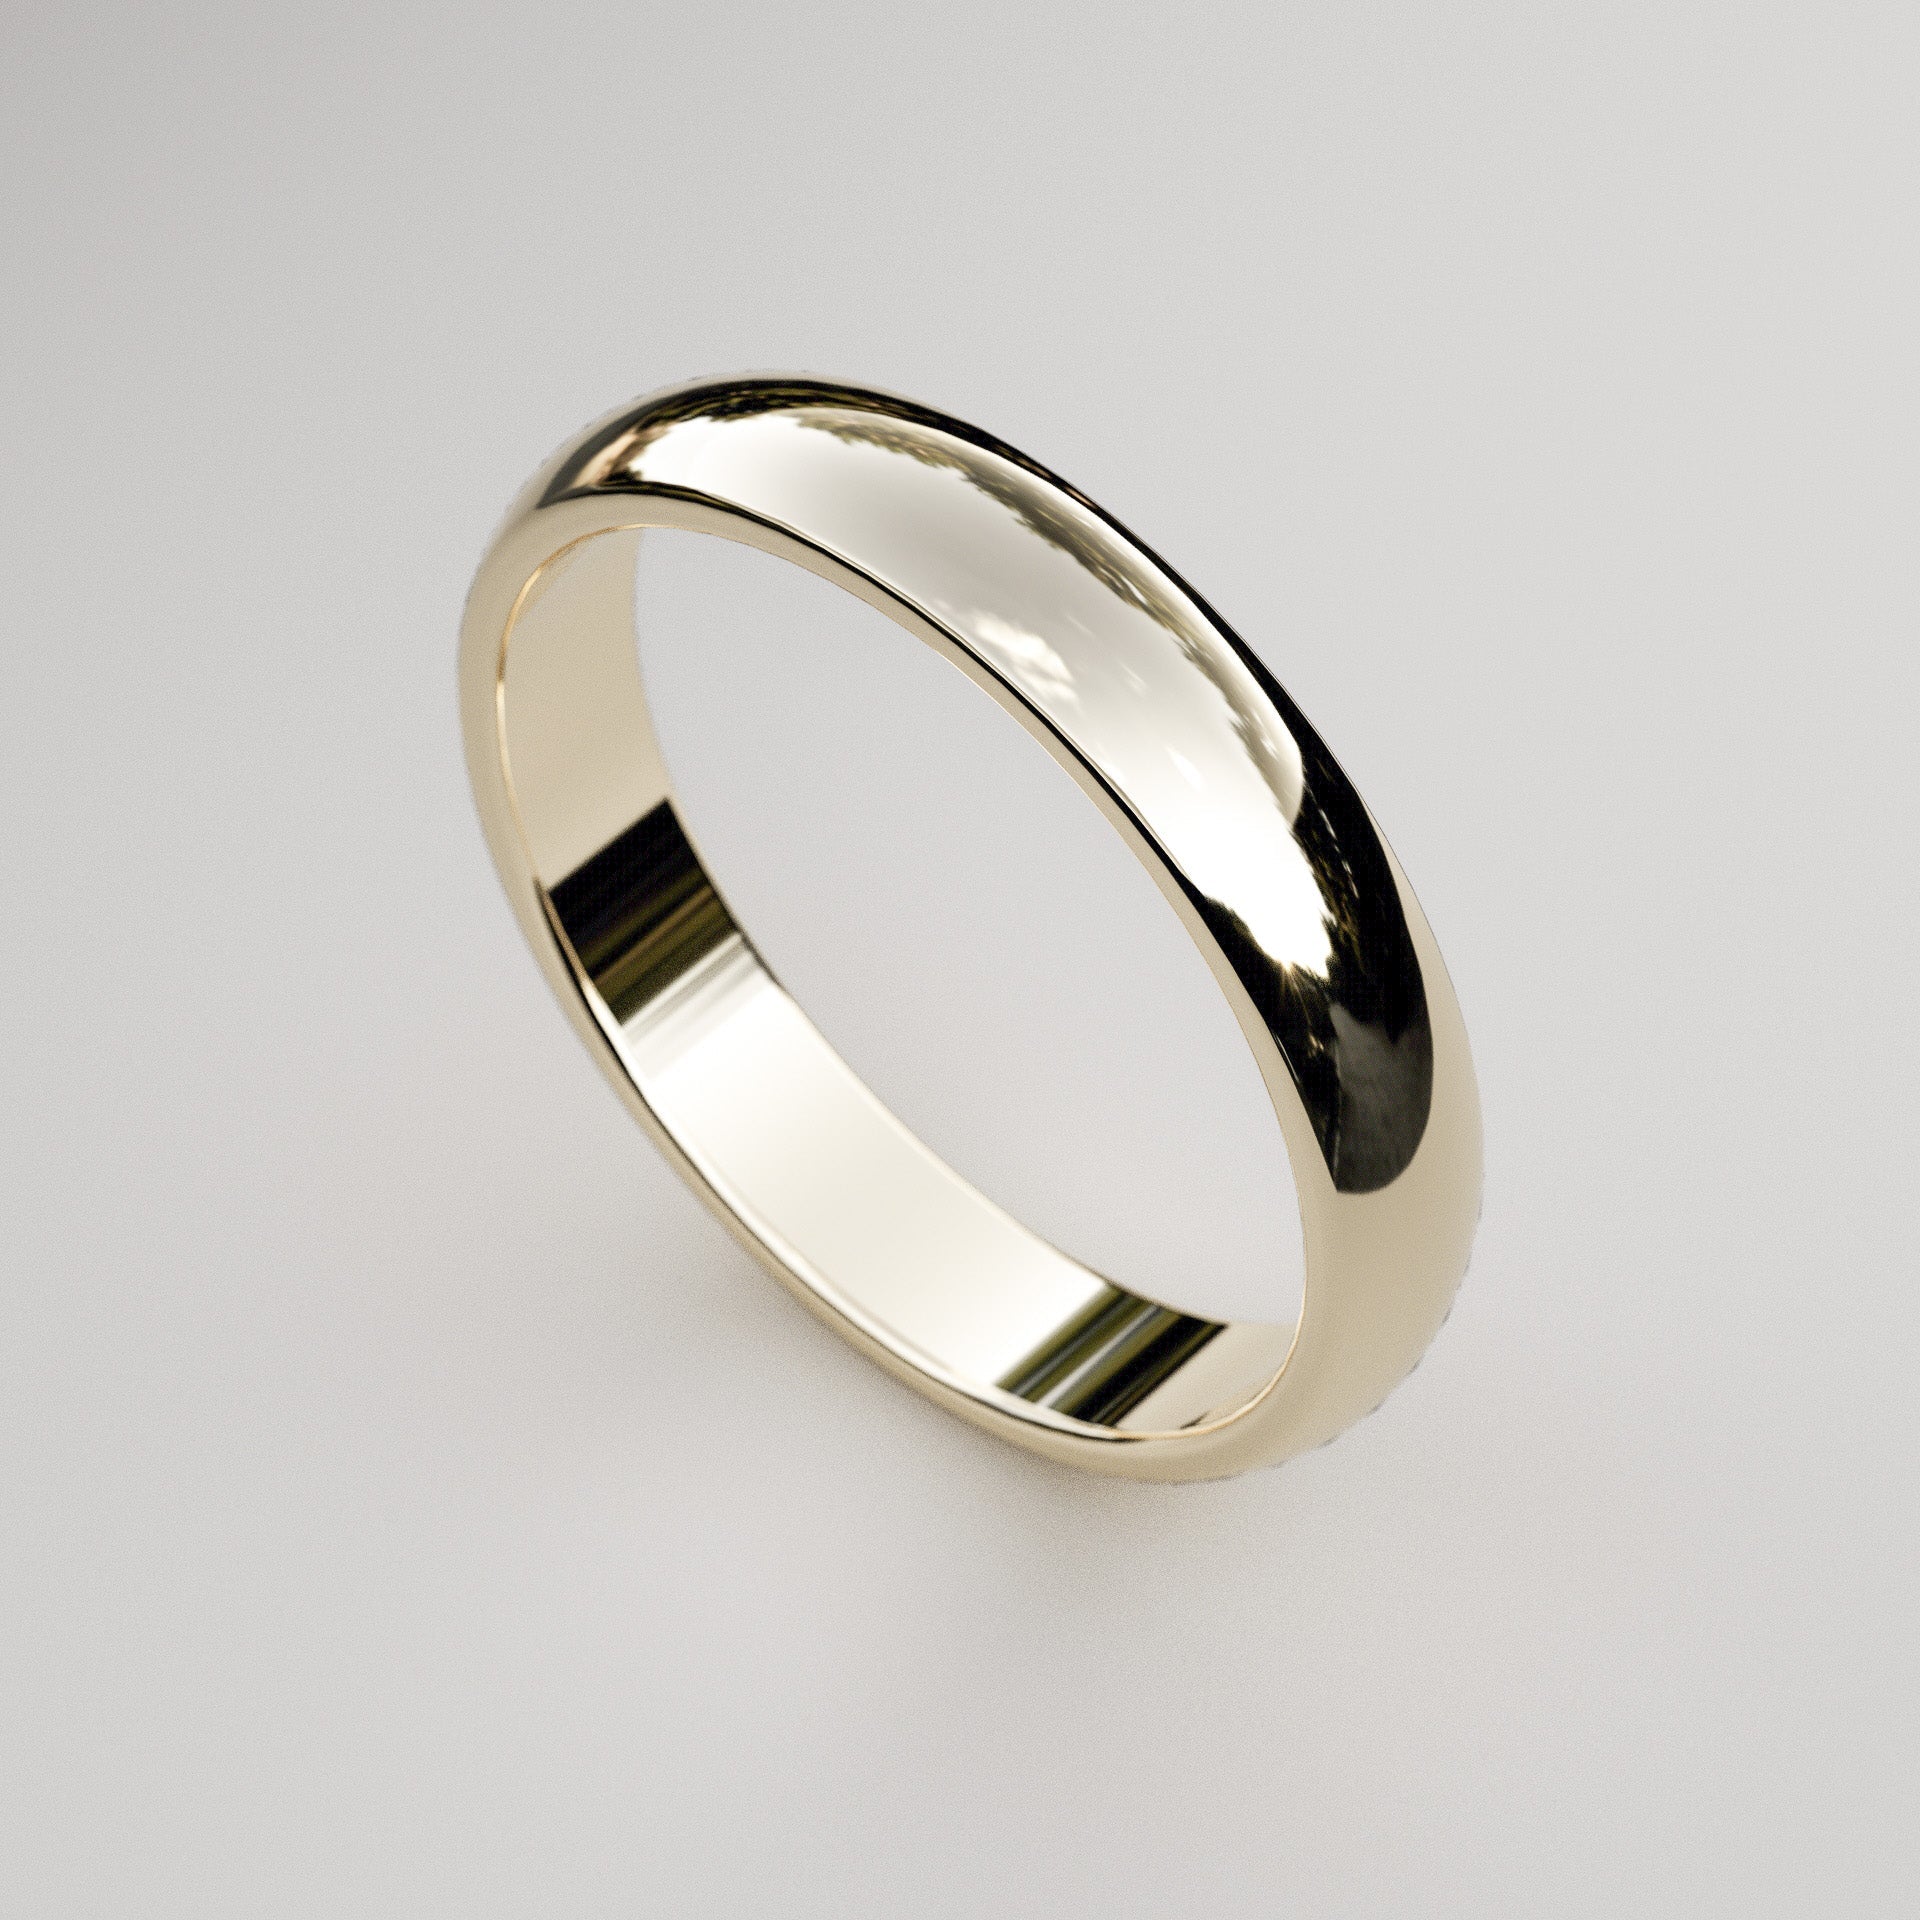 4mm wide classic domed wedding band in yellow gold